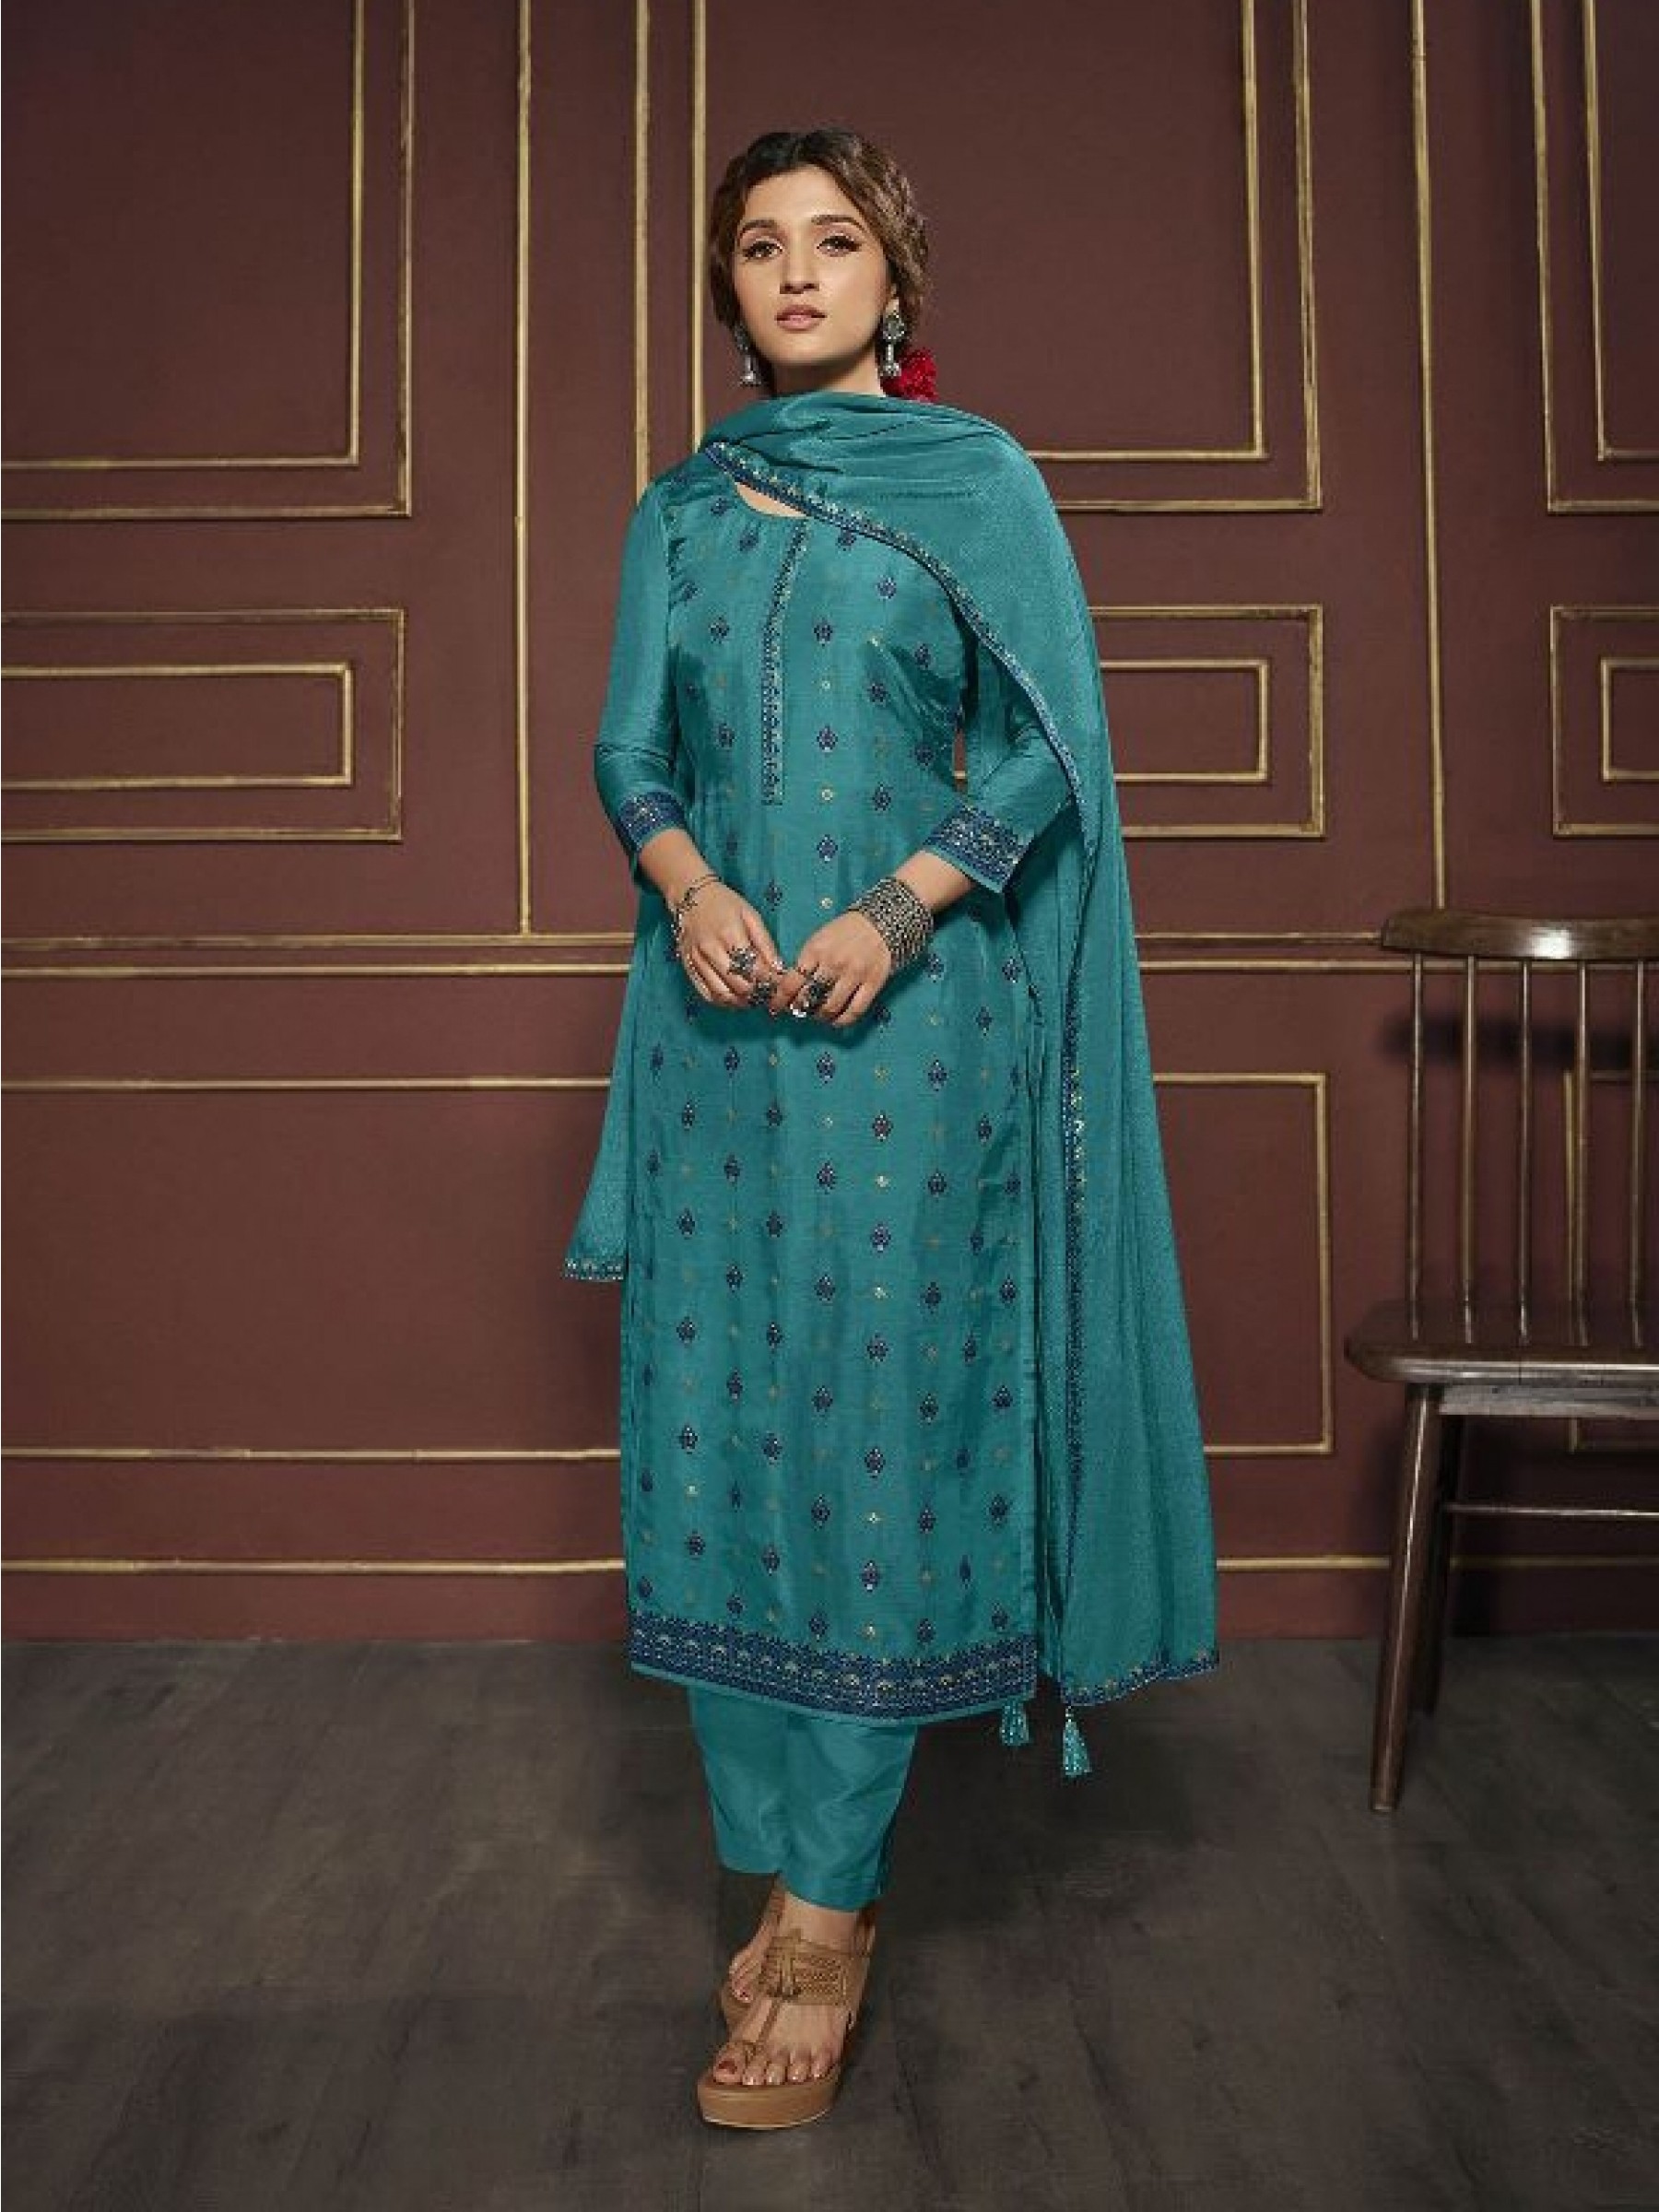 Pure Dola  Silk Party Wear Suit in Teal Blue Color with Embroidery Work